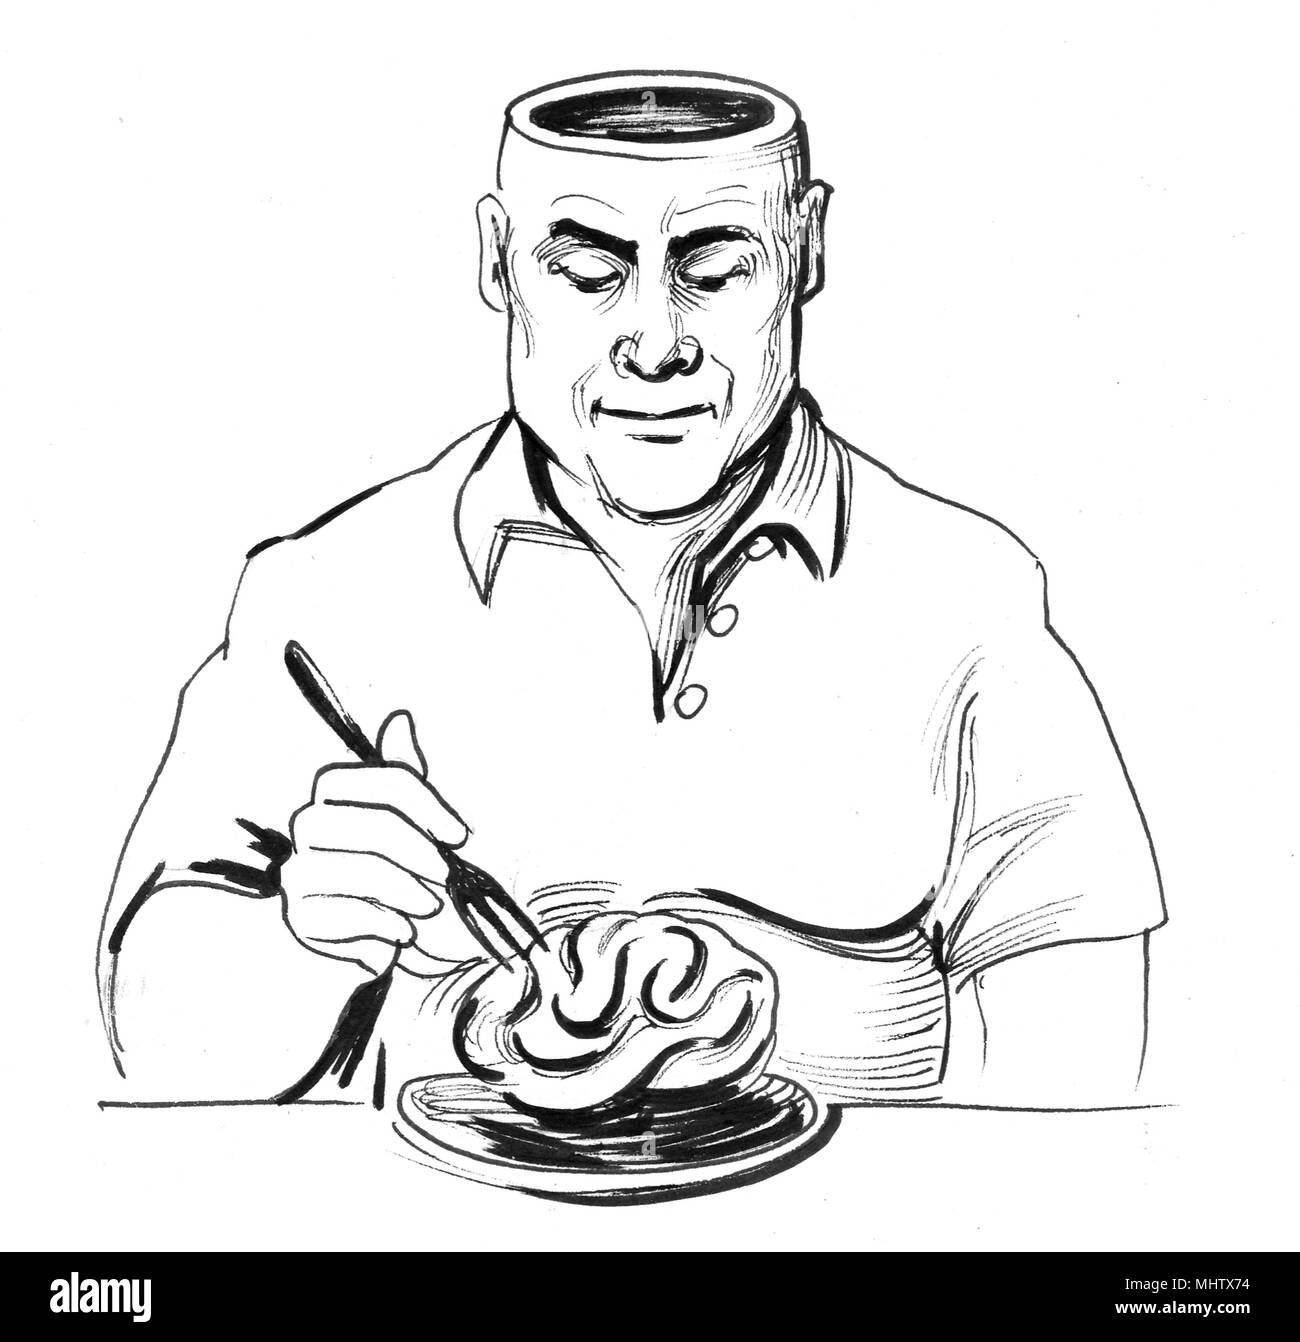 Man eating his brain. Ink black and white illustration Stock Photo